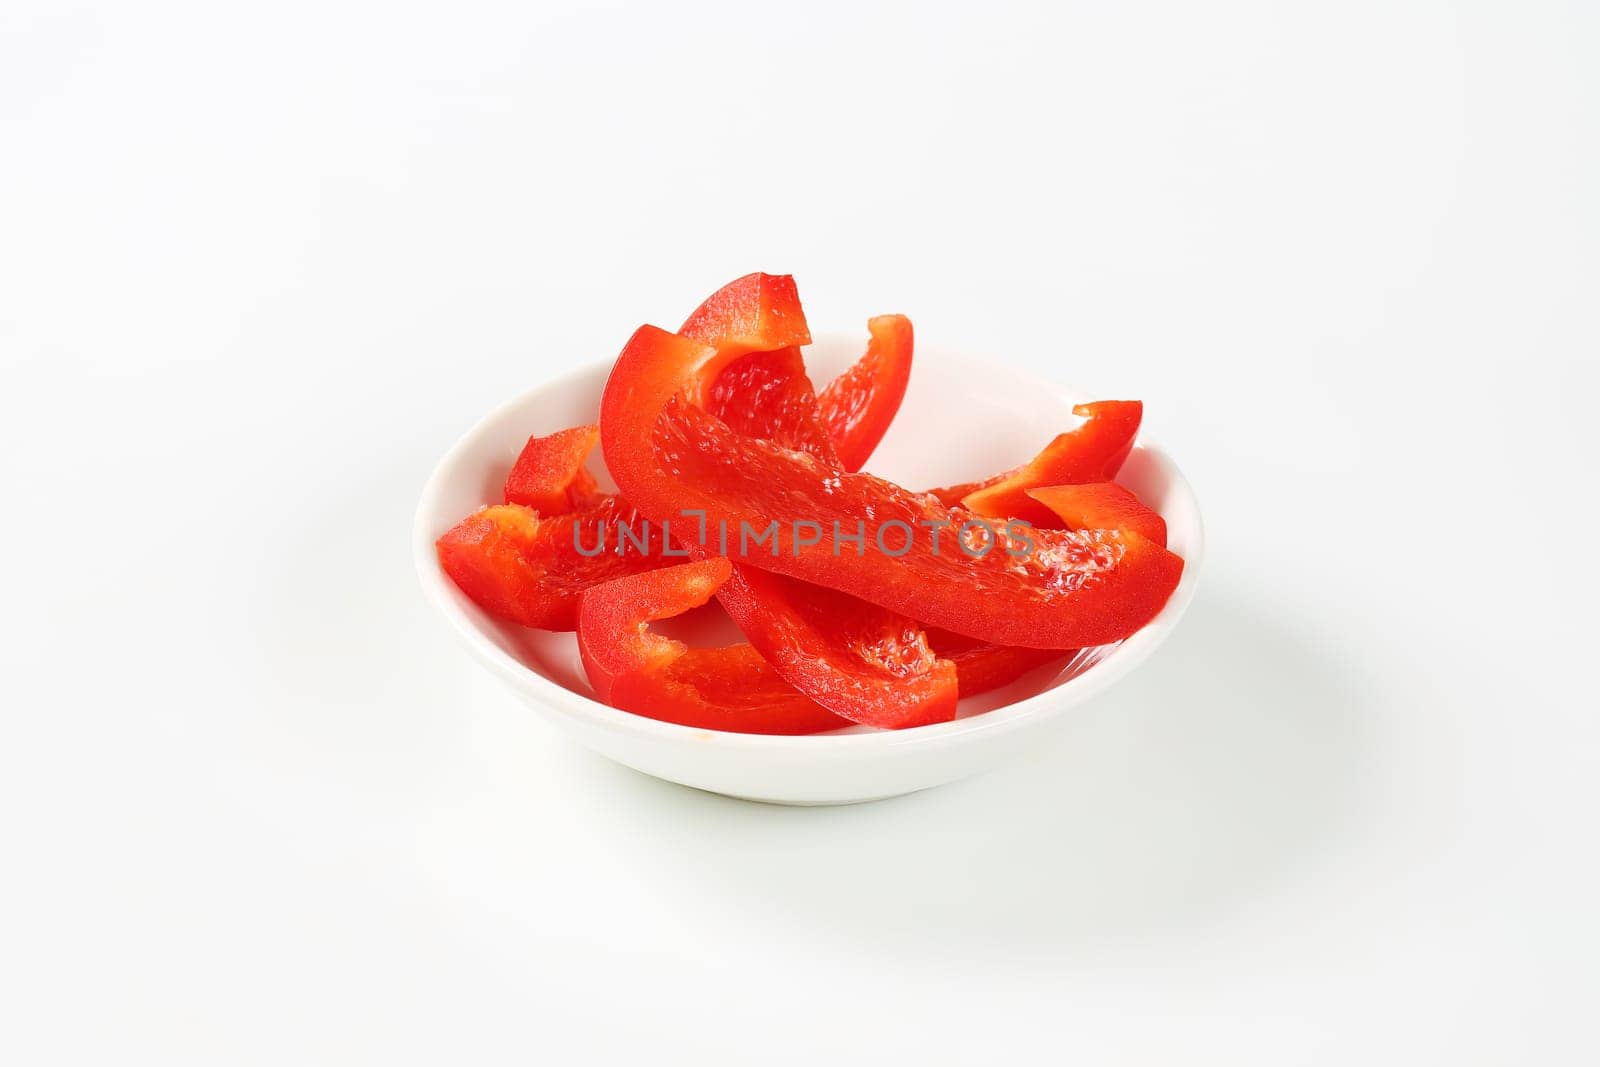 Slices of red bell pepper by Digifoodstock